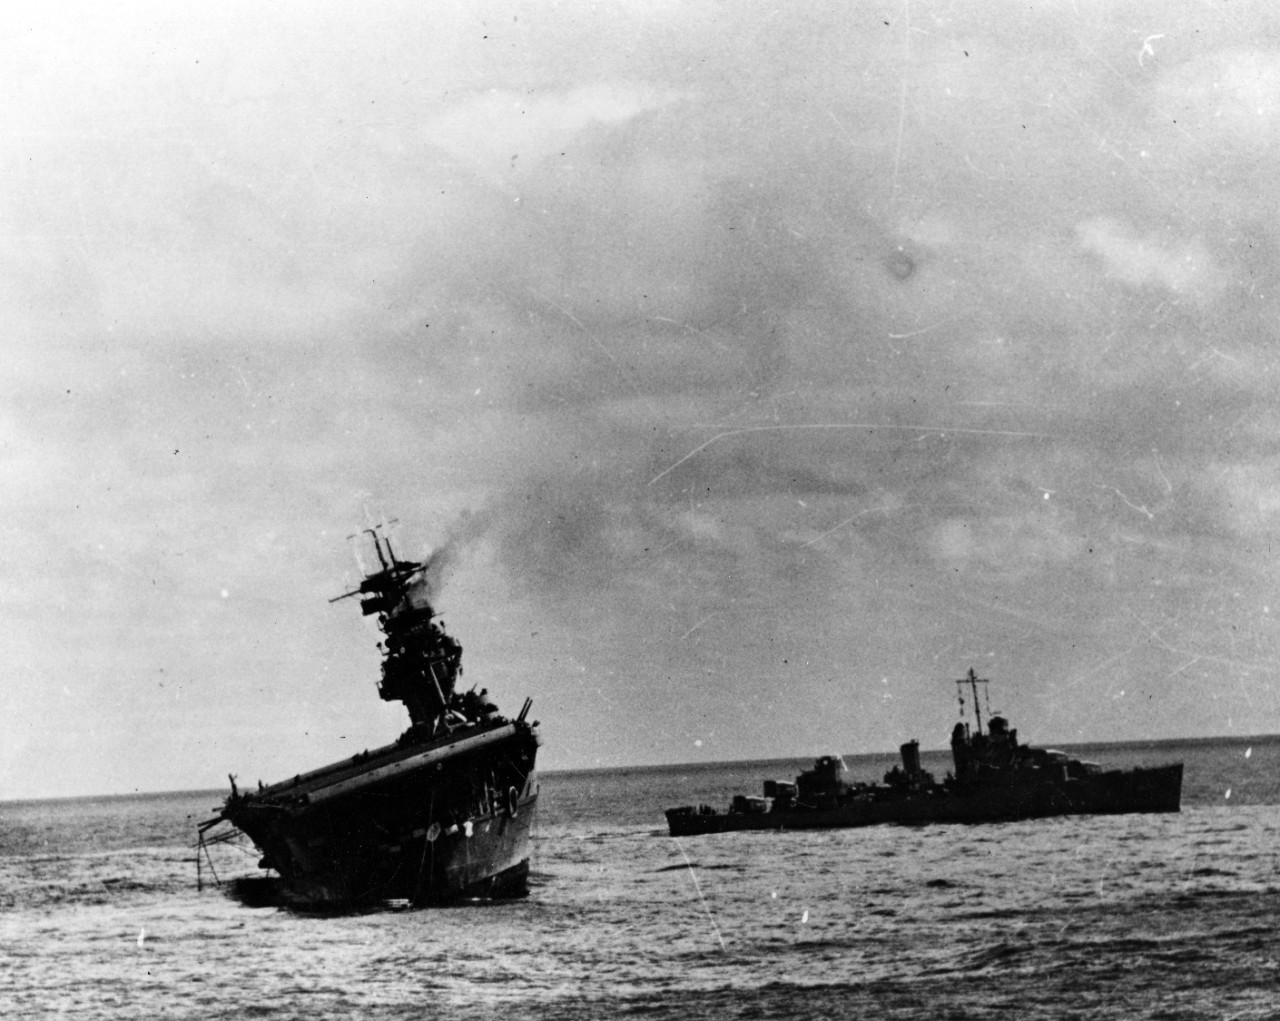 Photo #: 80-G-17061  Battle of Midway, June 1942